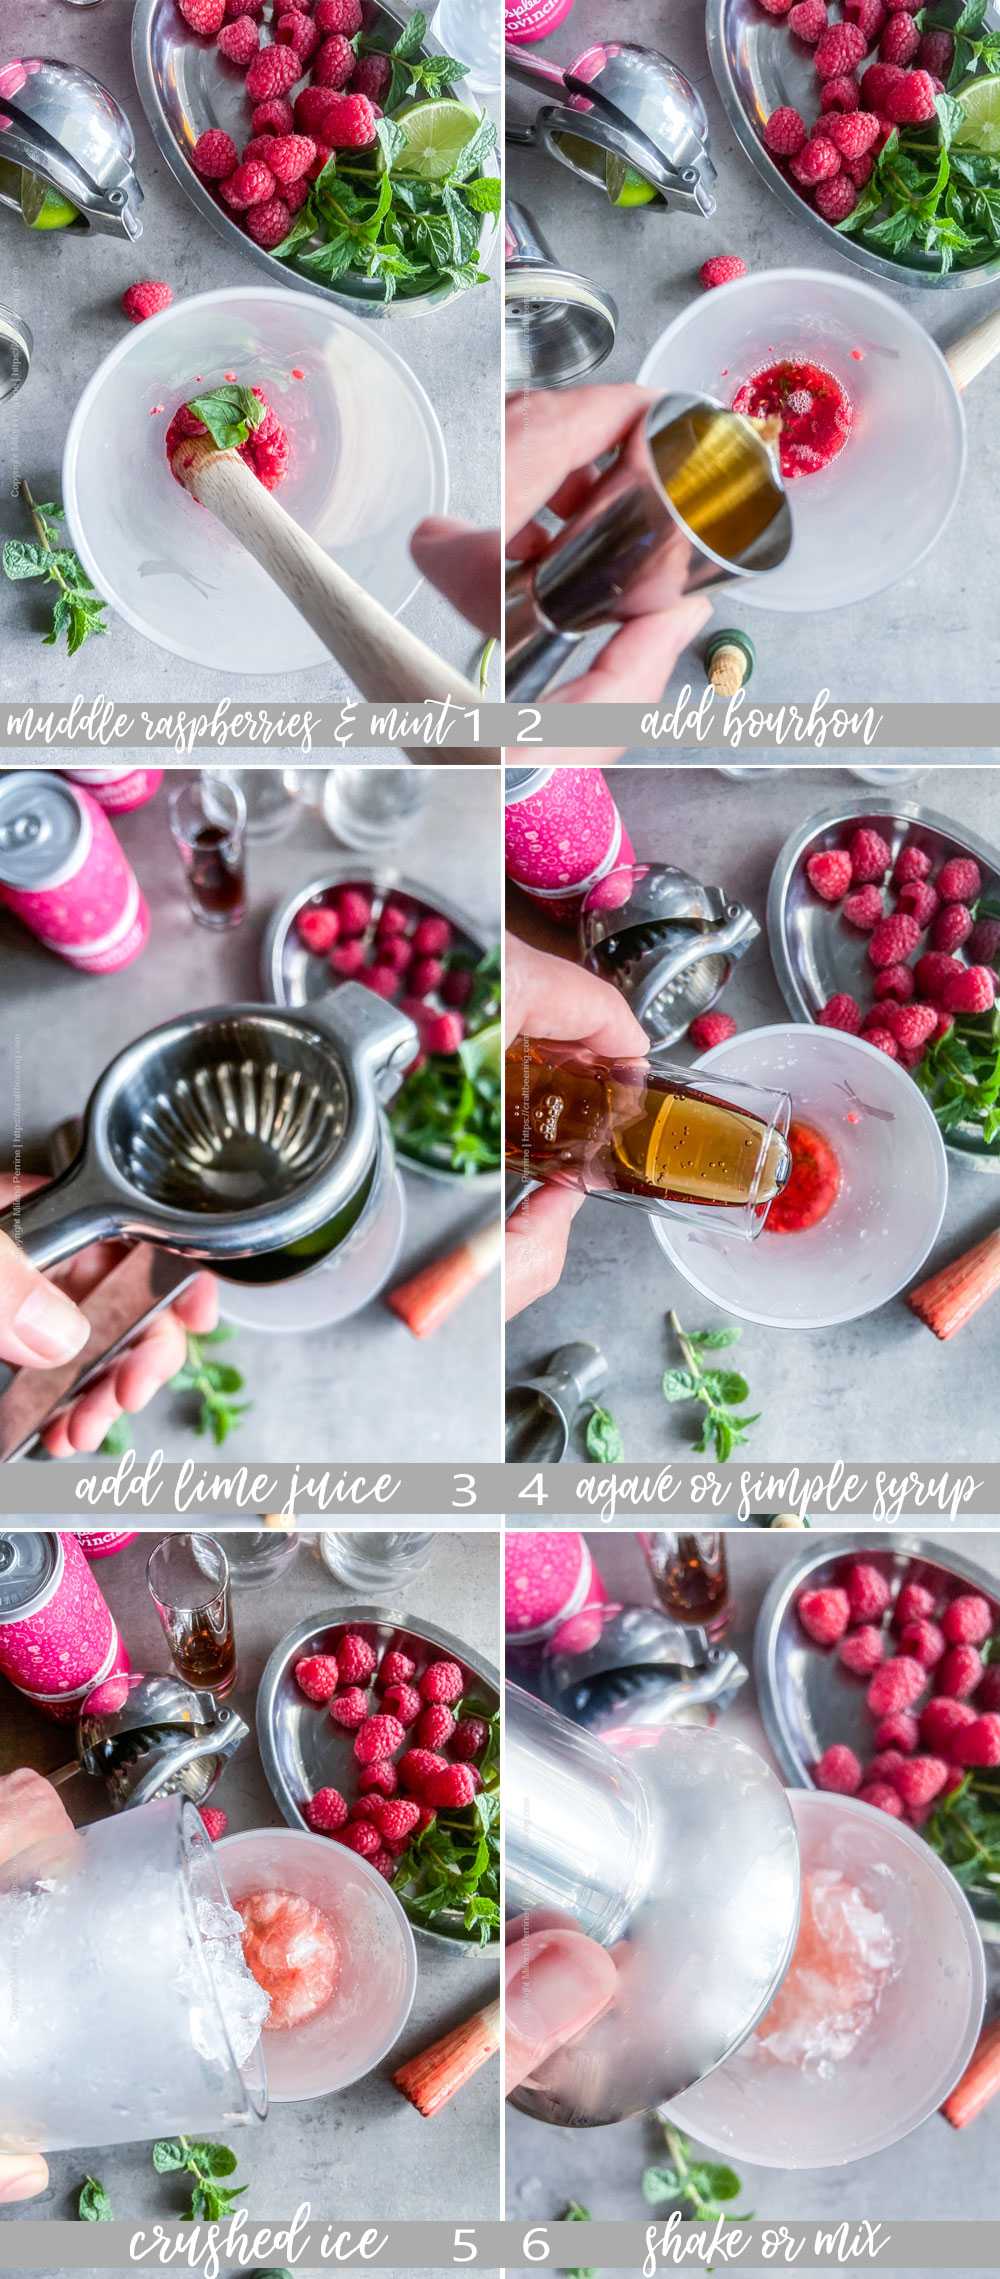 Step by step how to make bourbon smash with fresh raspberries and mint.